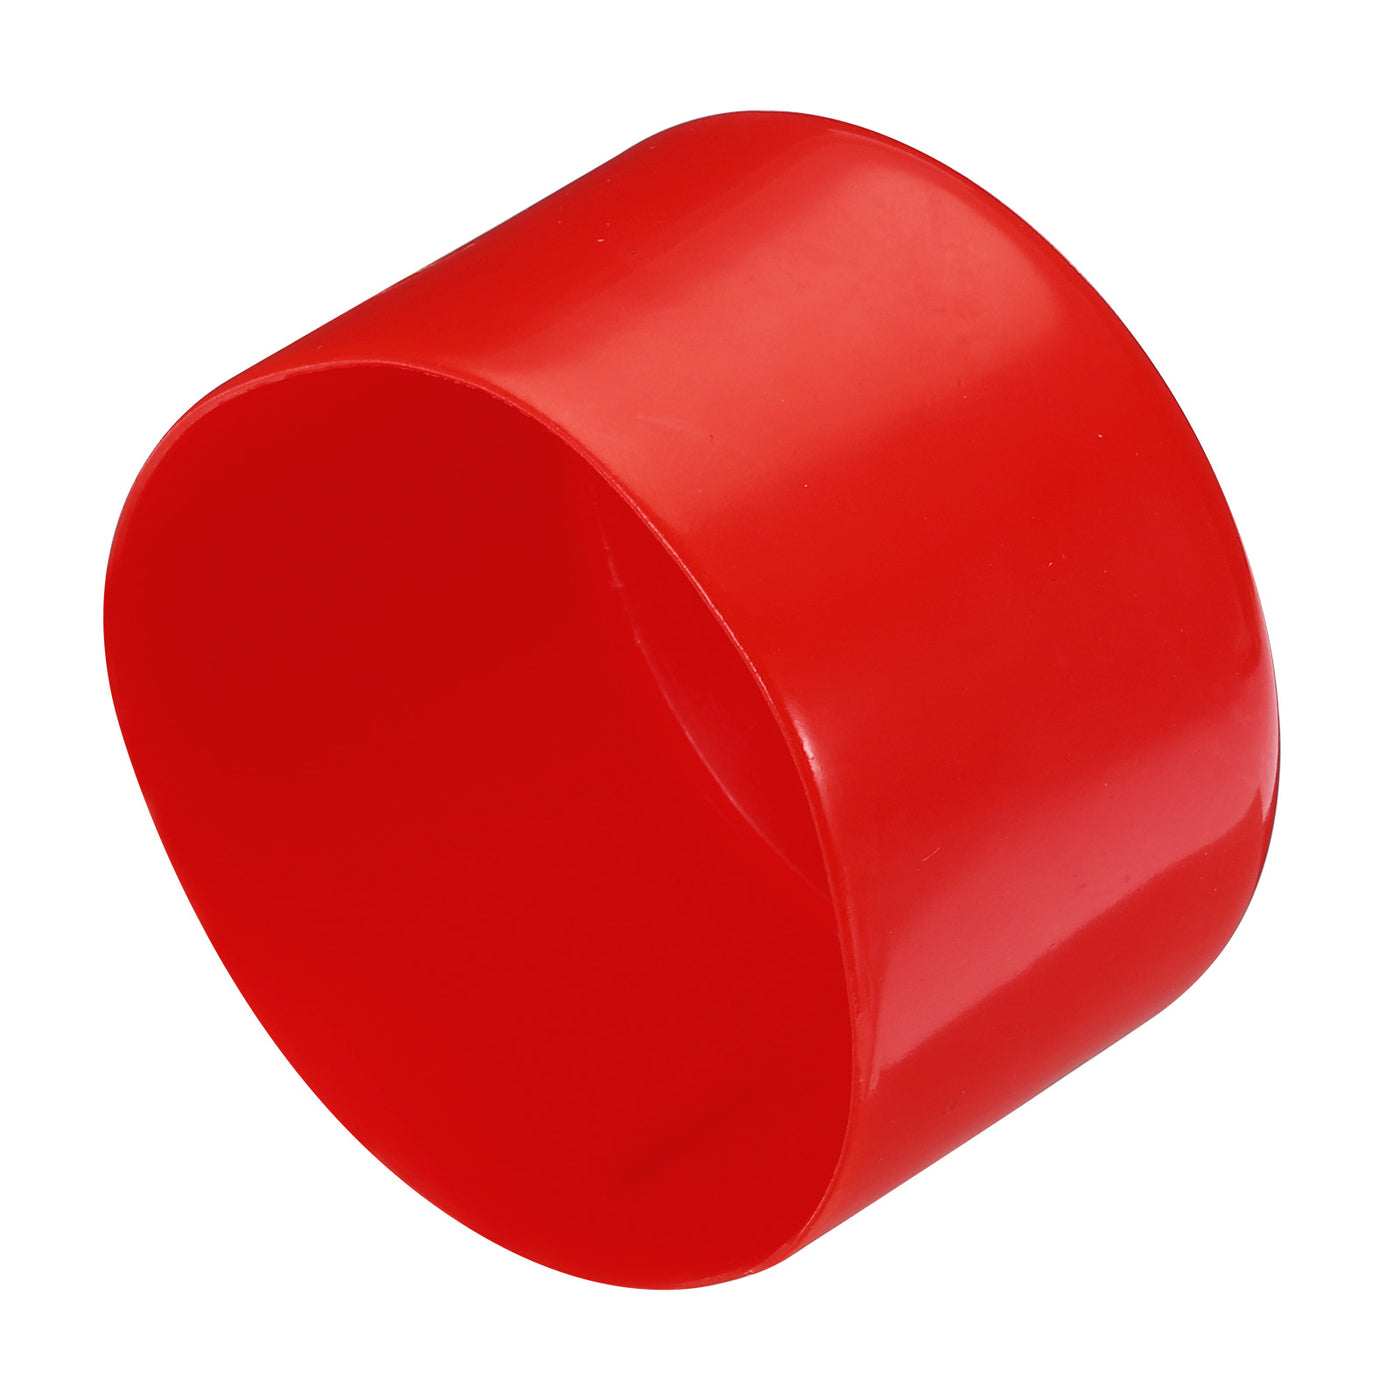 uxcell Uxcell 2pcs Rubber End Caps 85mm ID Vinyl Round Tube Bolt Cap Cover Screw Thread Protectors Red